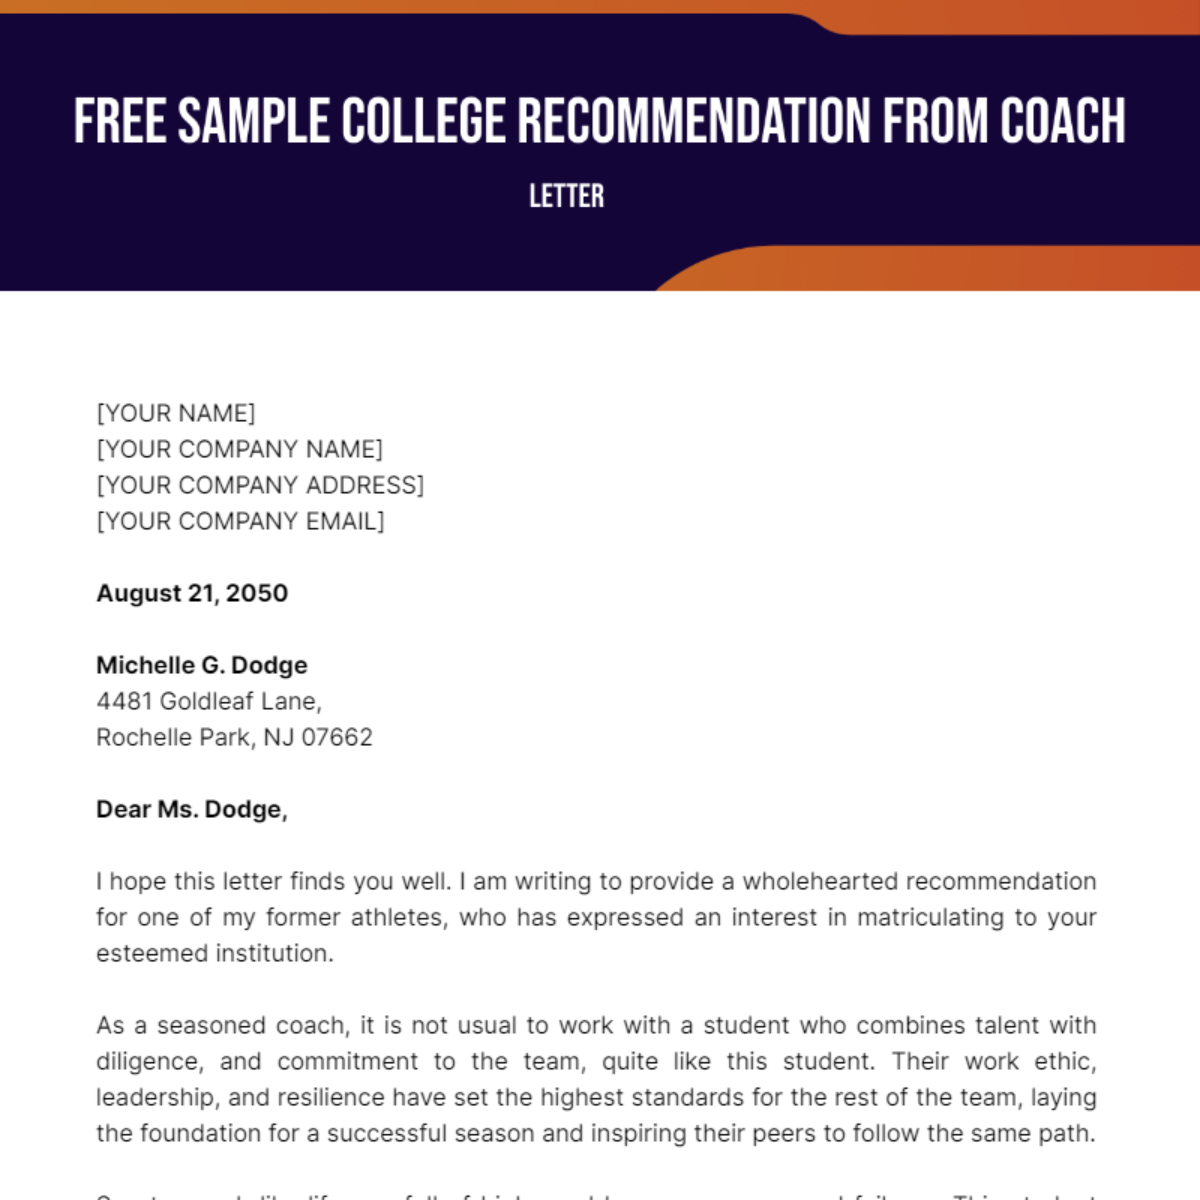 Sample College Letter of Recommendation from Coach Template